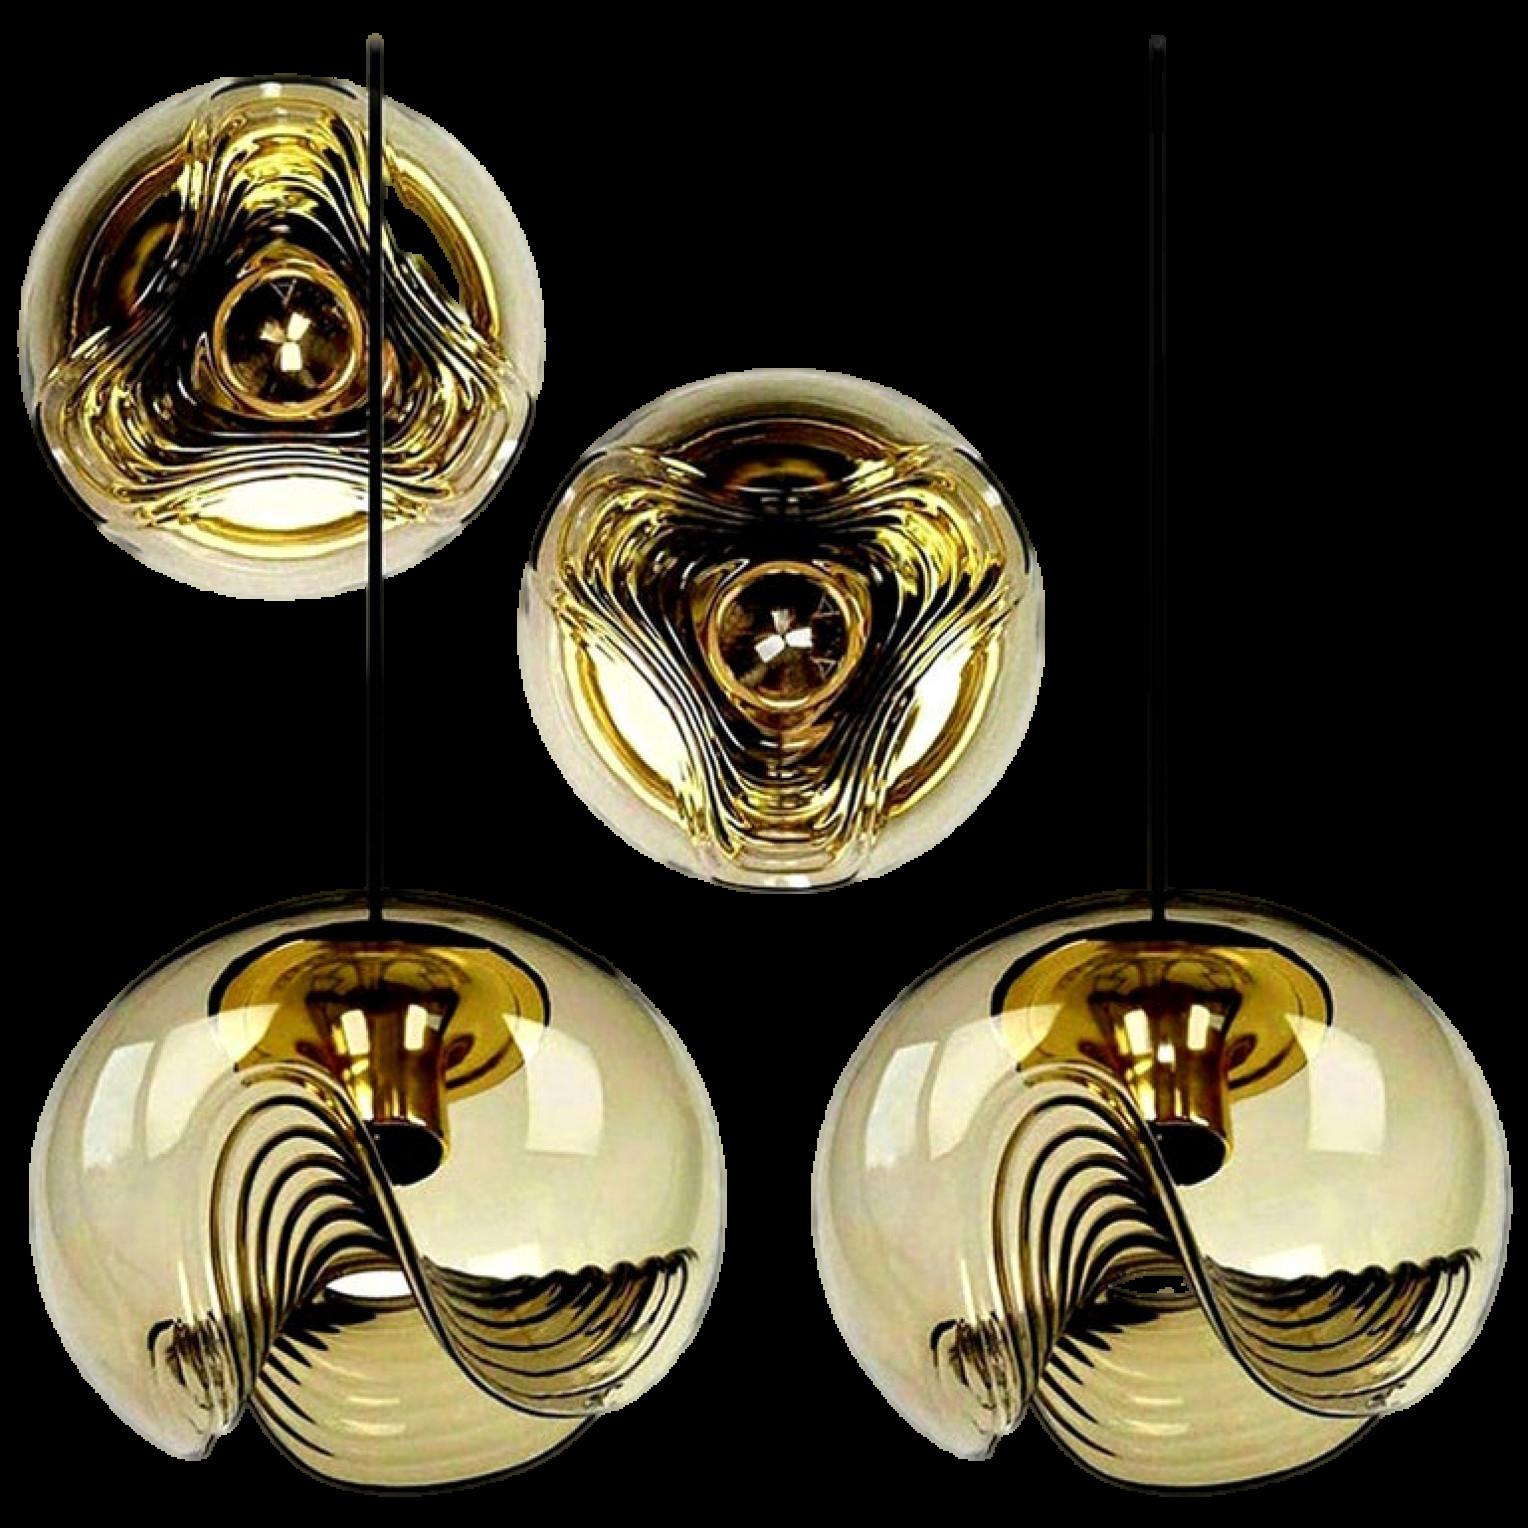 A special set of round biomorphic smoked glass light fixtures designed by Koch & Lowy for Peill & Putzler, manufactured in Germany, circa 1970s. These Peill & Putzler vintage wall lights become quickly design classics.

The blown glass has a